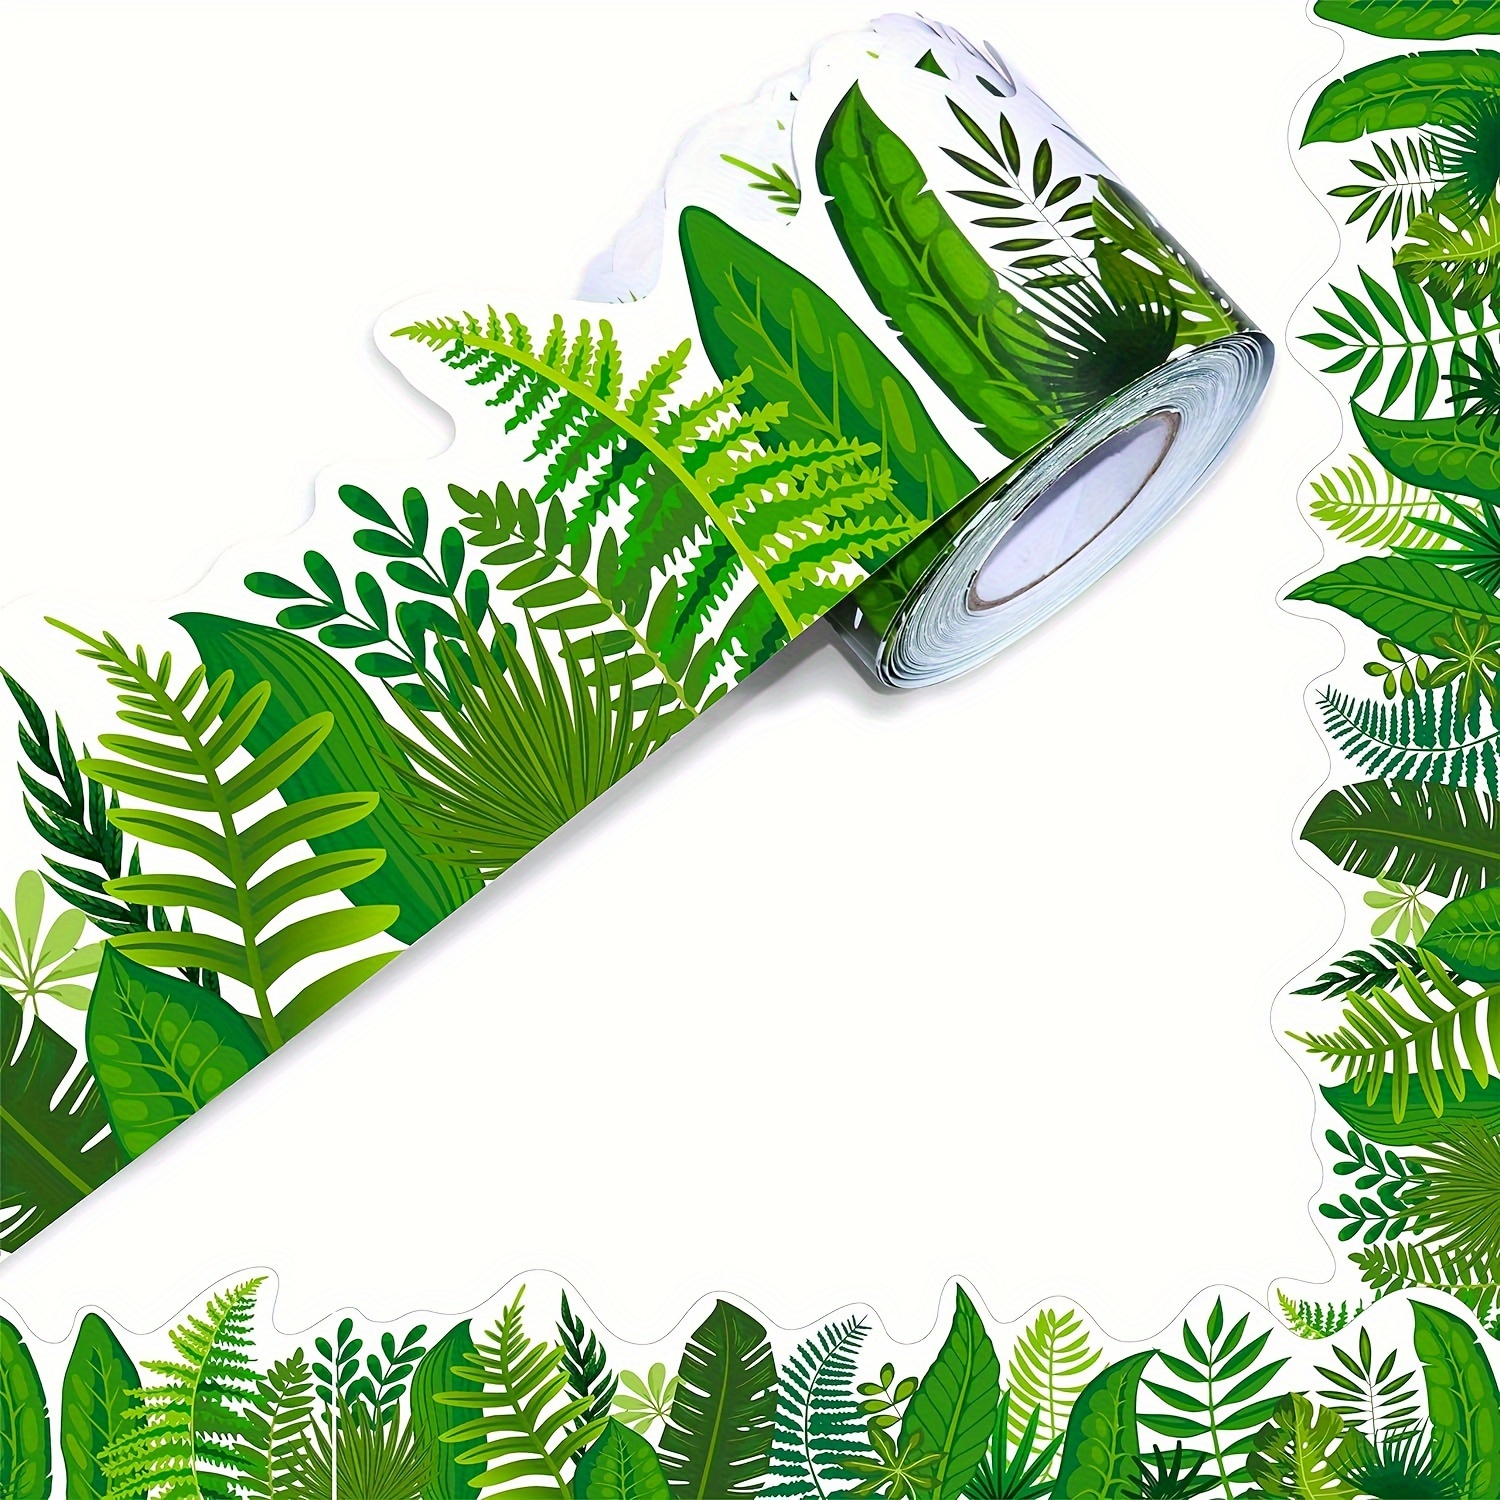 

Tropical And Floral Leaf Pattern Bulletin Board Border Trim, Paper Classroom Decorations, 60 Feet Greenery Themed Decorative Roll For School, Office, Teacher Supplies